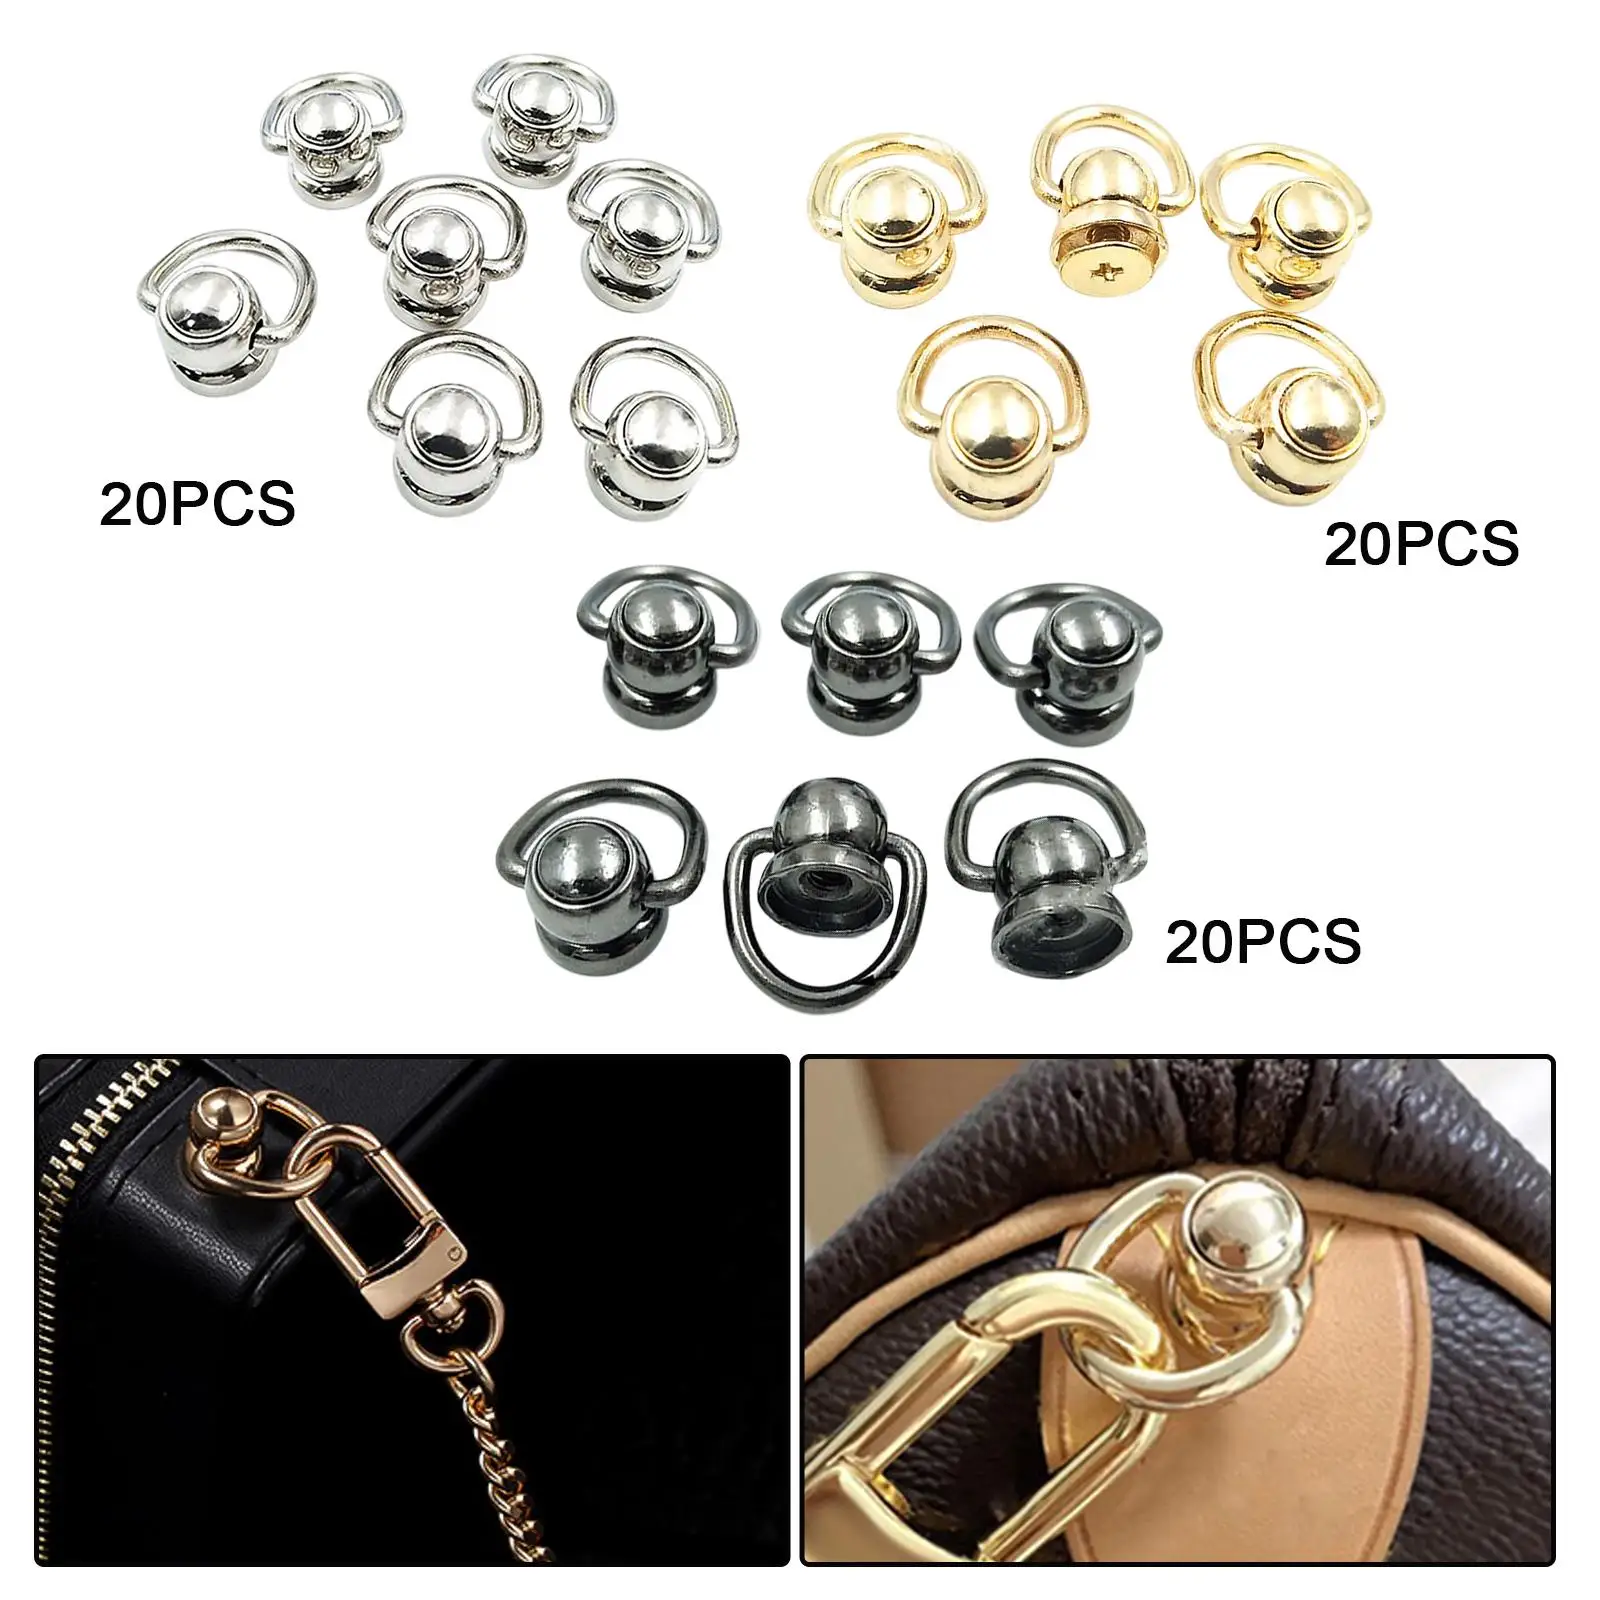 20x Bags Side Anchors Accessories Clasps Rotate Buckles for DIY Purse Making